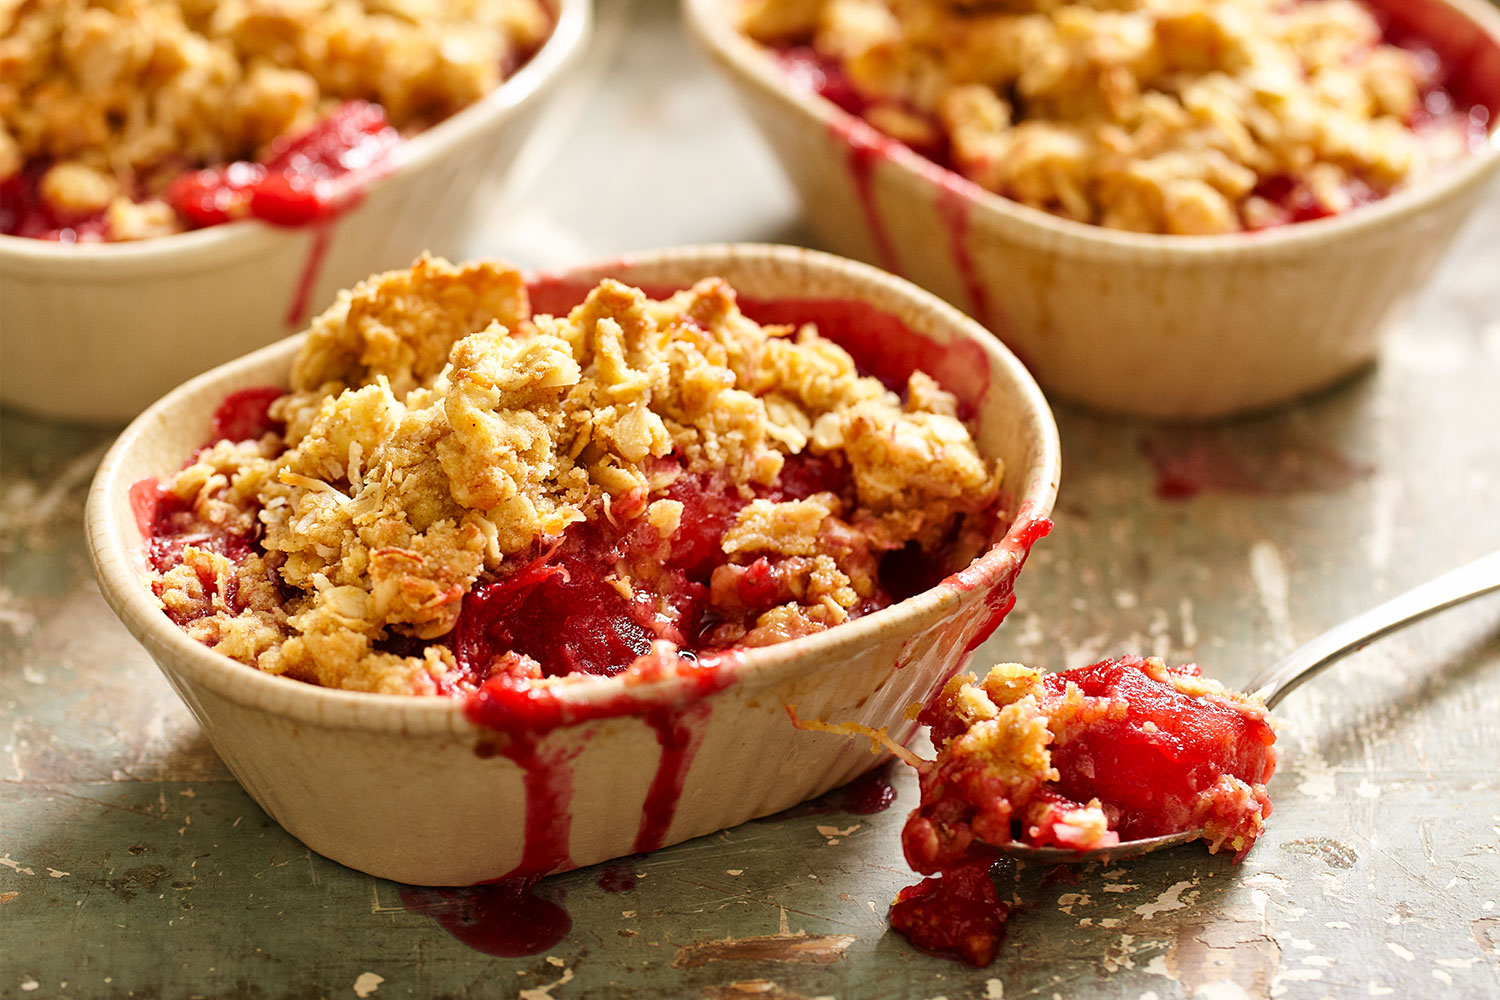 Apple, rhubarb and strawberry crumble recipe Recipe | Better Homes and ...